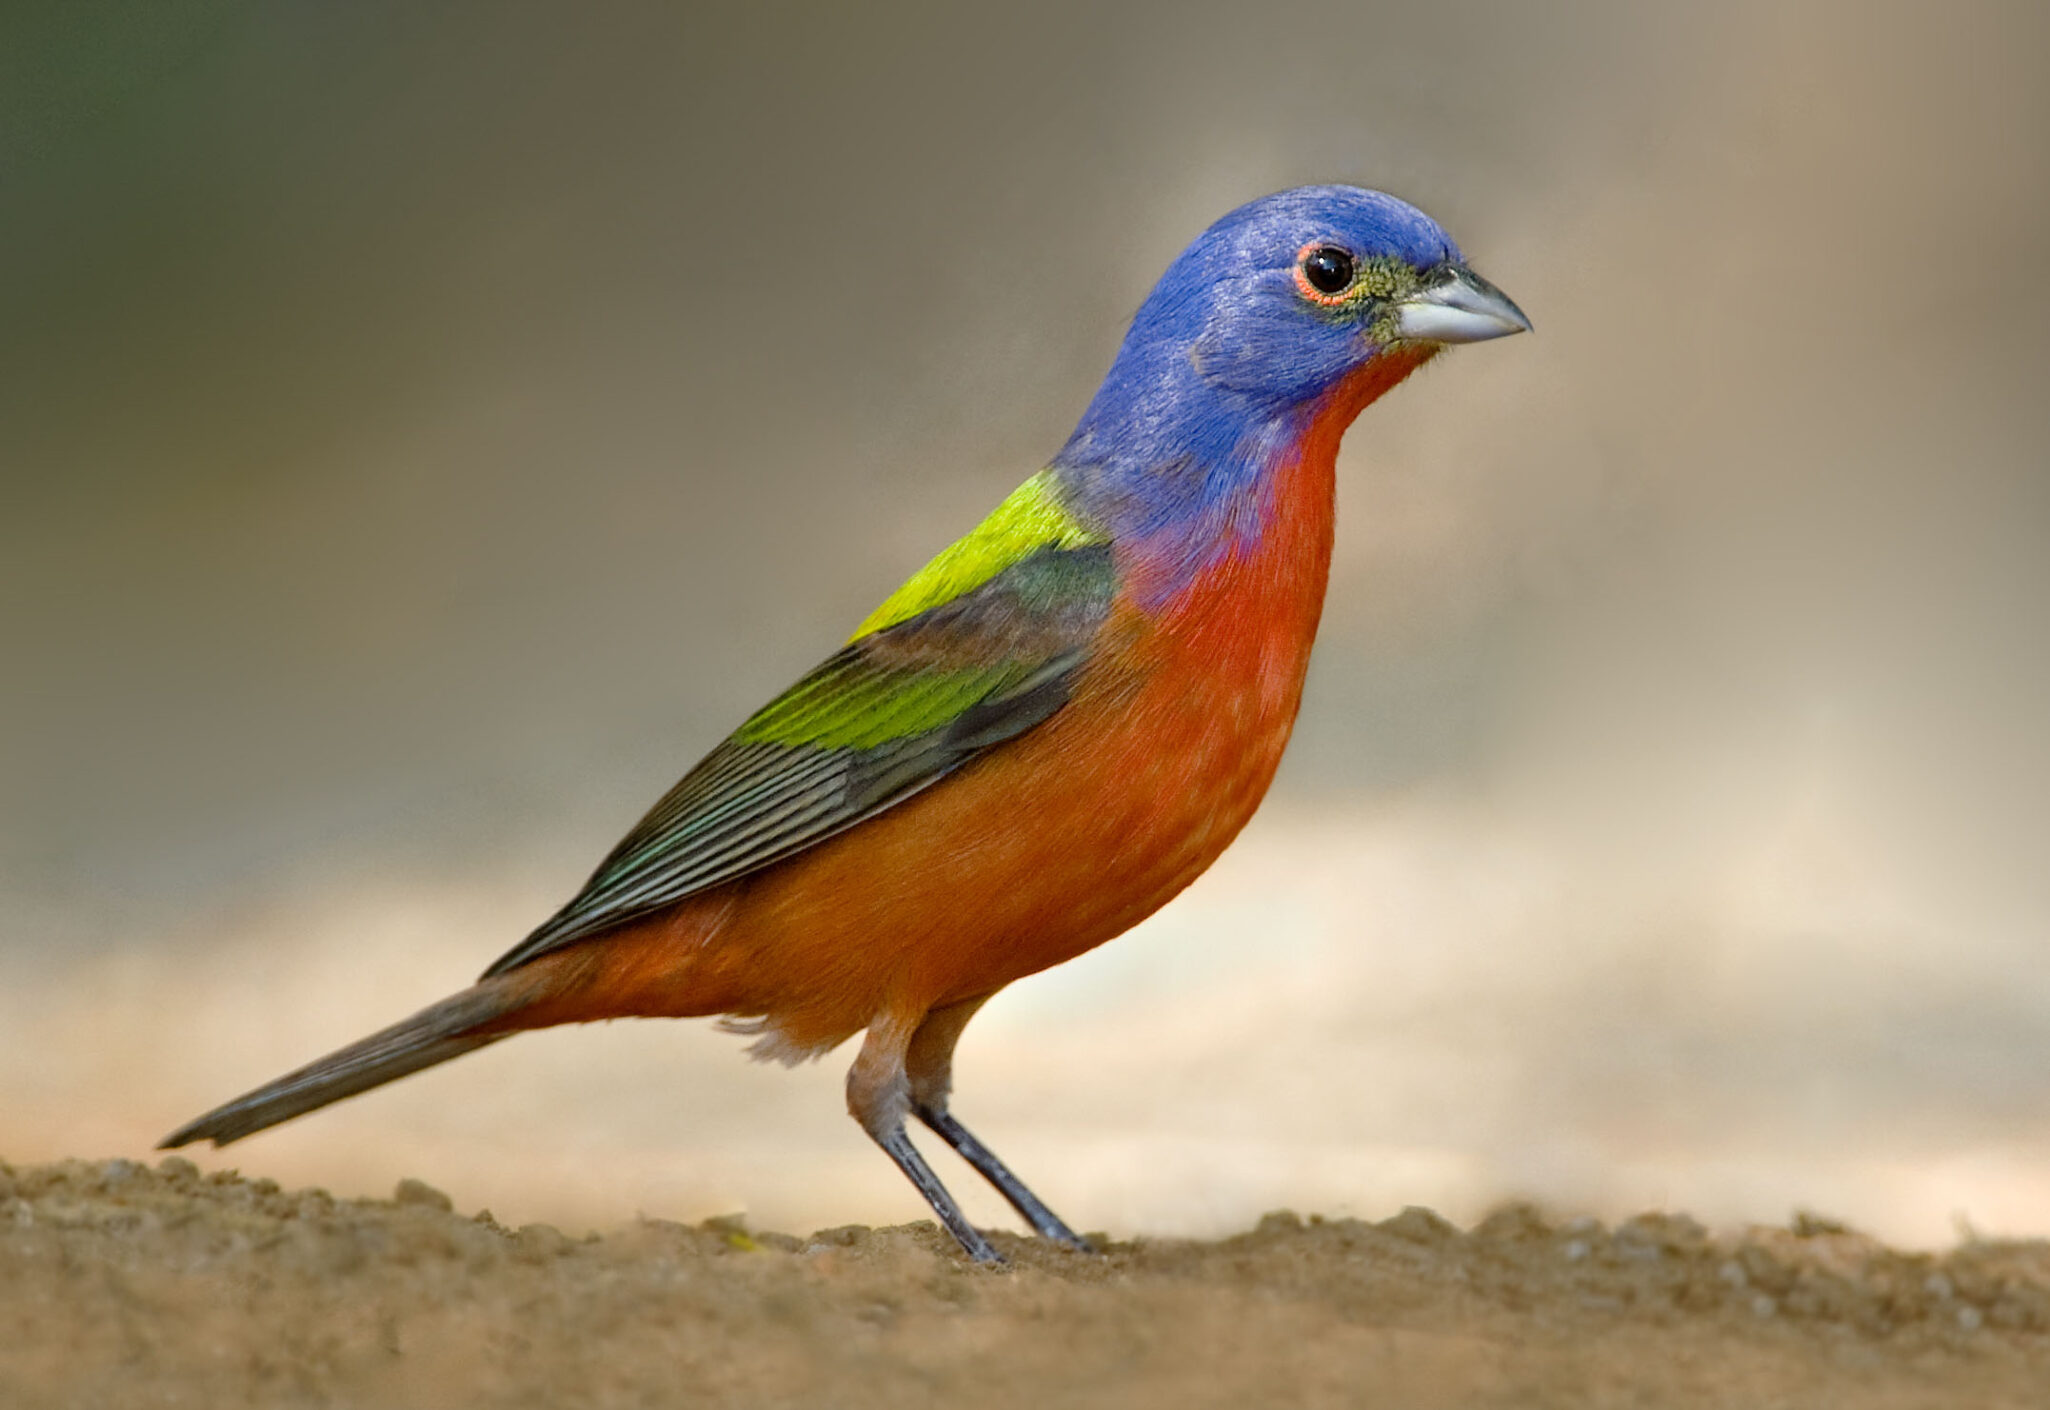 A Coat of Many Colors - Multi-Colored Plumage in Birds